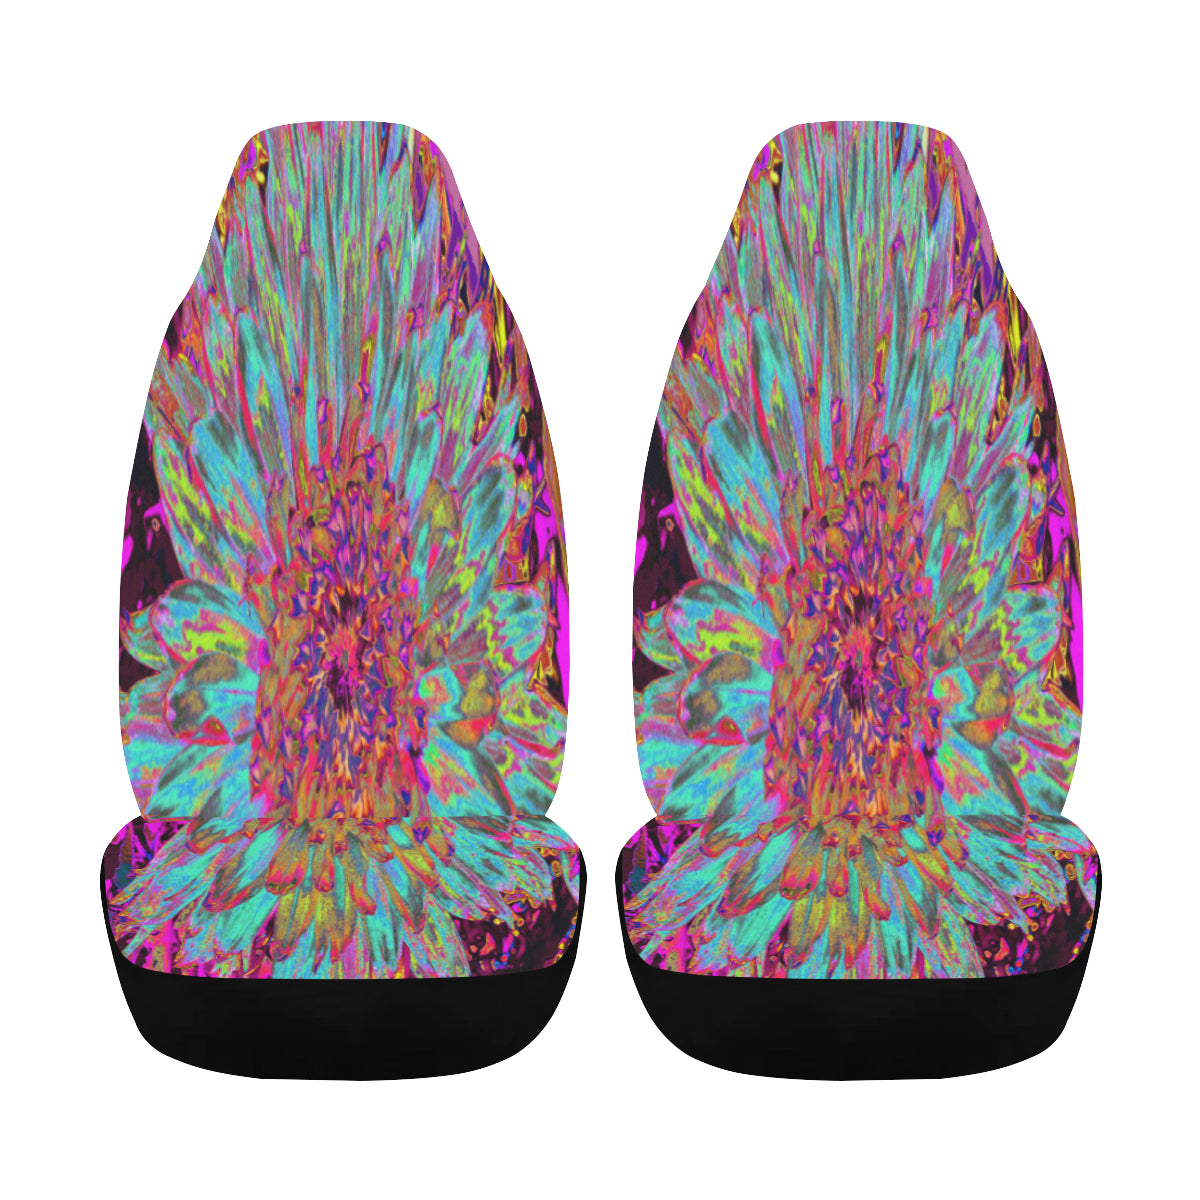 Car Seat Covers, Psychedelic Teal Blue Abstract Decorative Dahlia